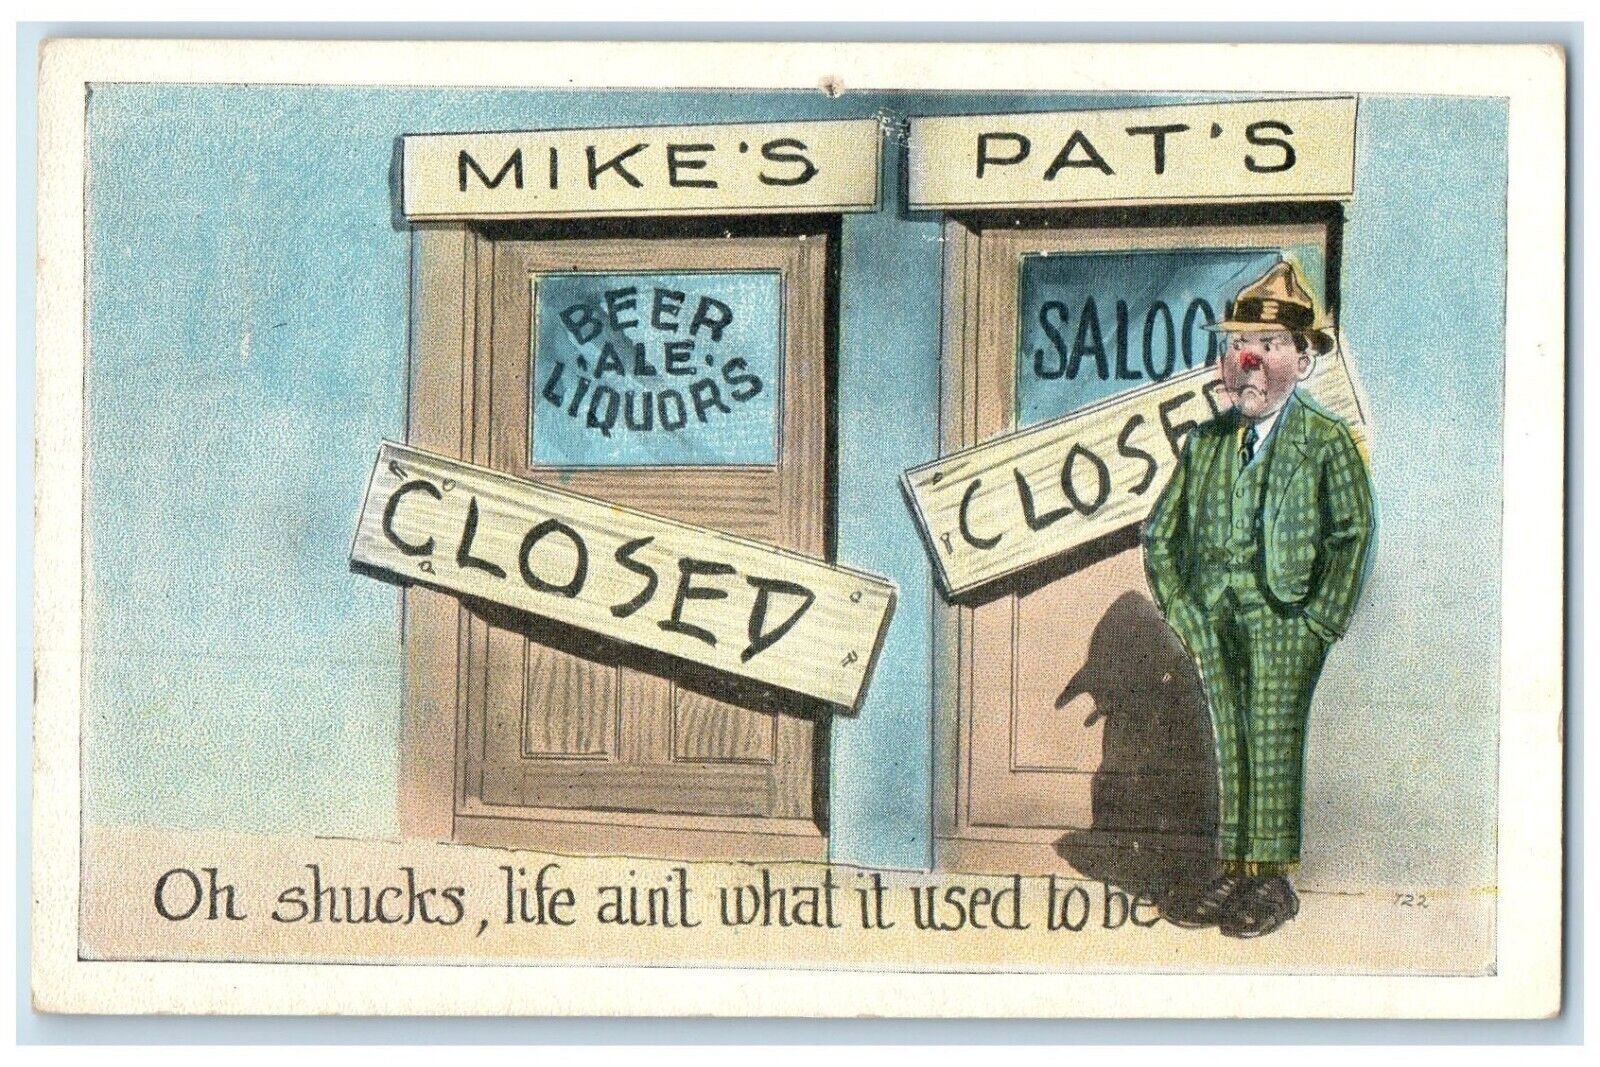 Mike's Pat's Beer Saloon Closed Life Aint What It Used To Be Temperance Postcard